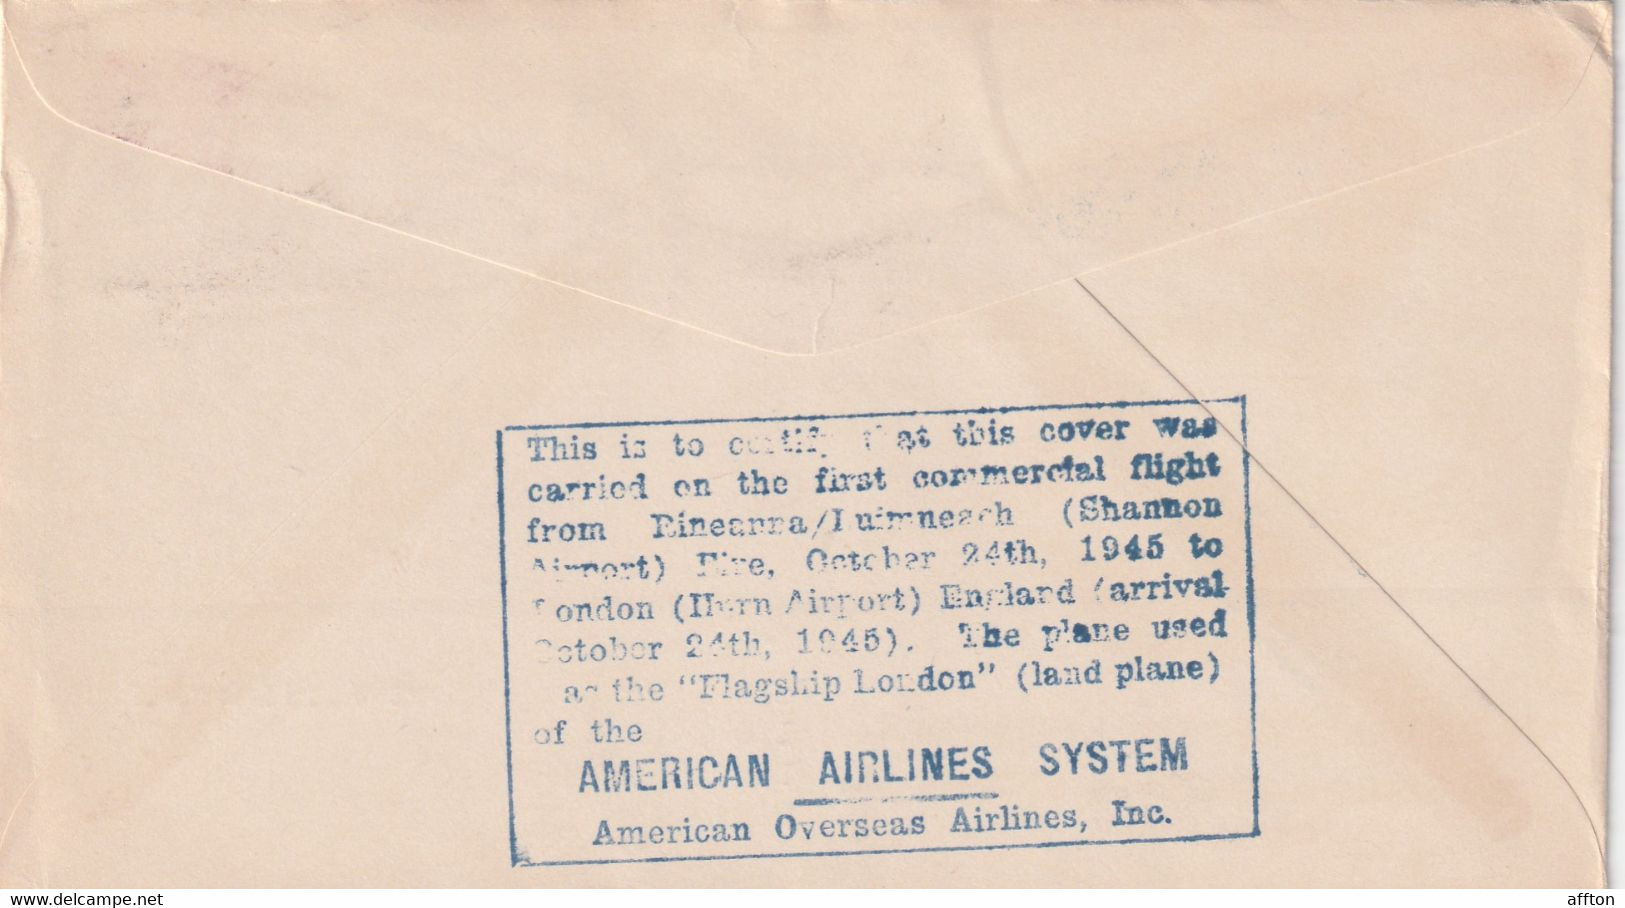 Ireland 1945 Air Mail Cover Mailed - Airmail